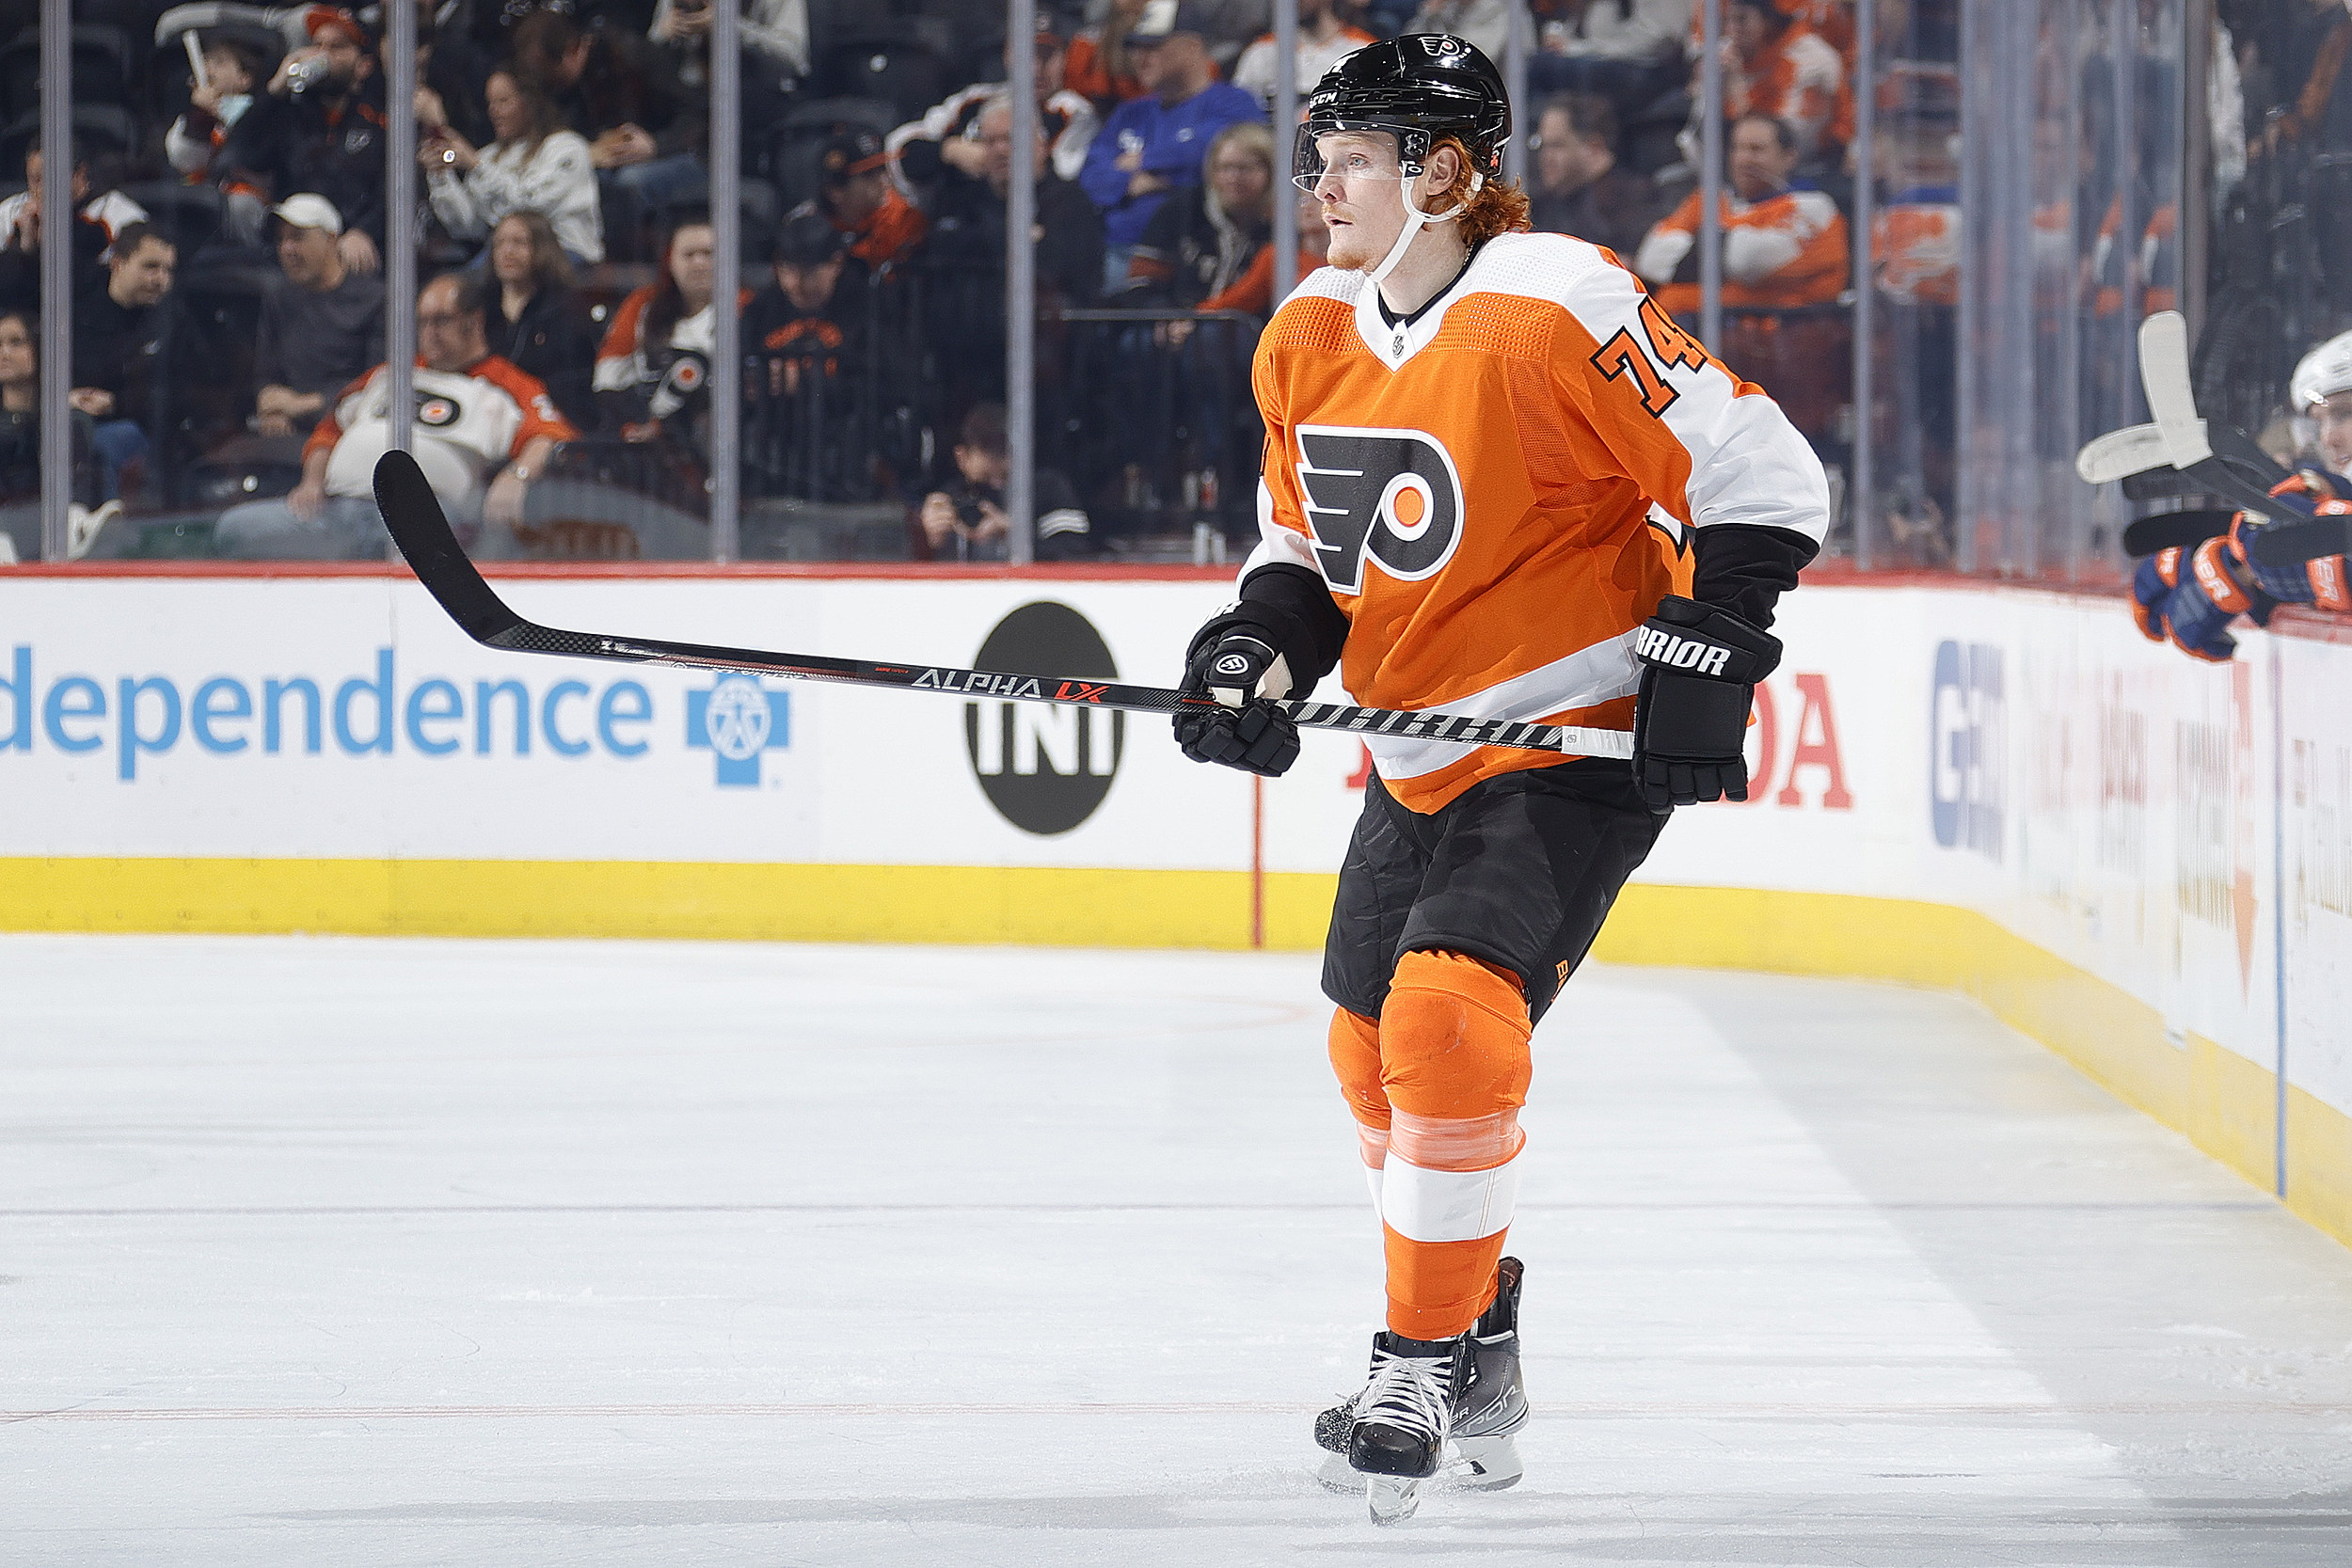 Briere's Blockbuster Shows Flyers are Indeed 'Open for Business